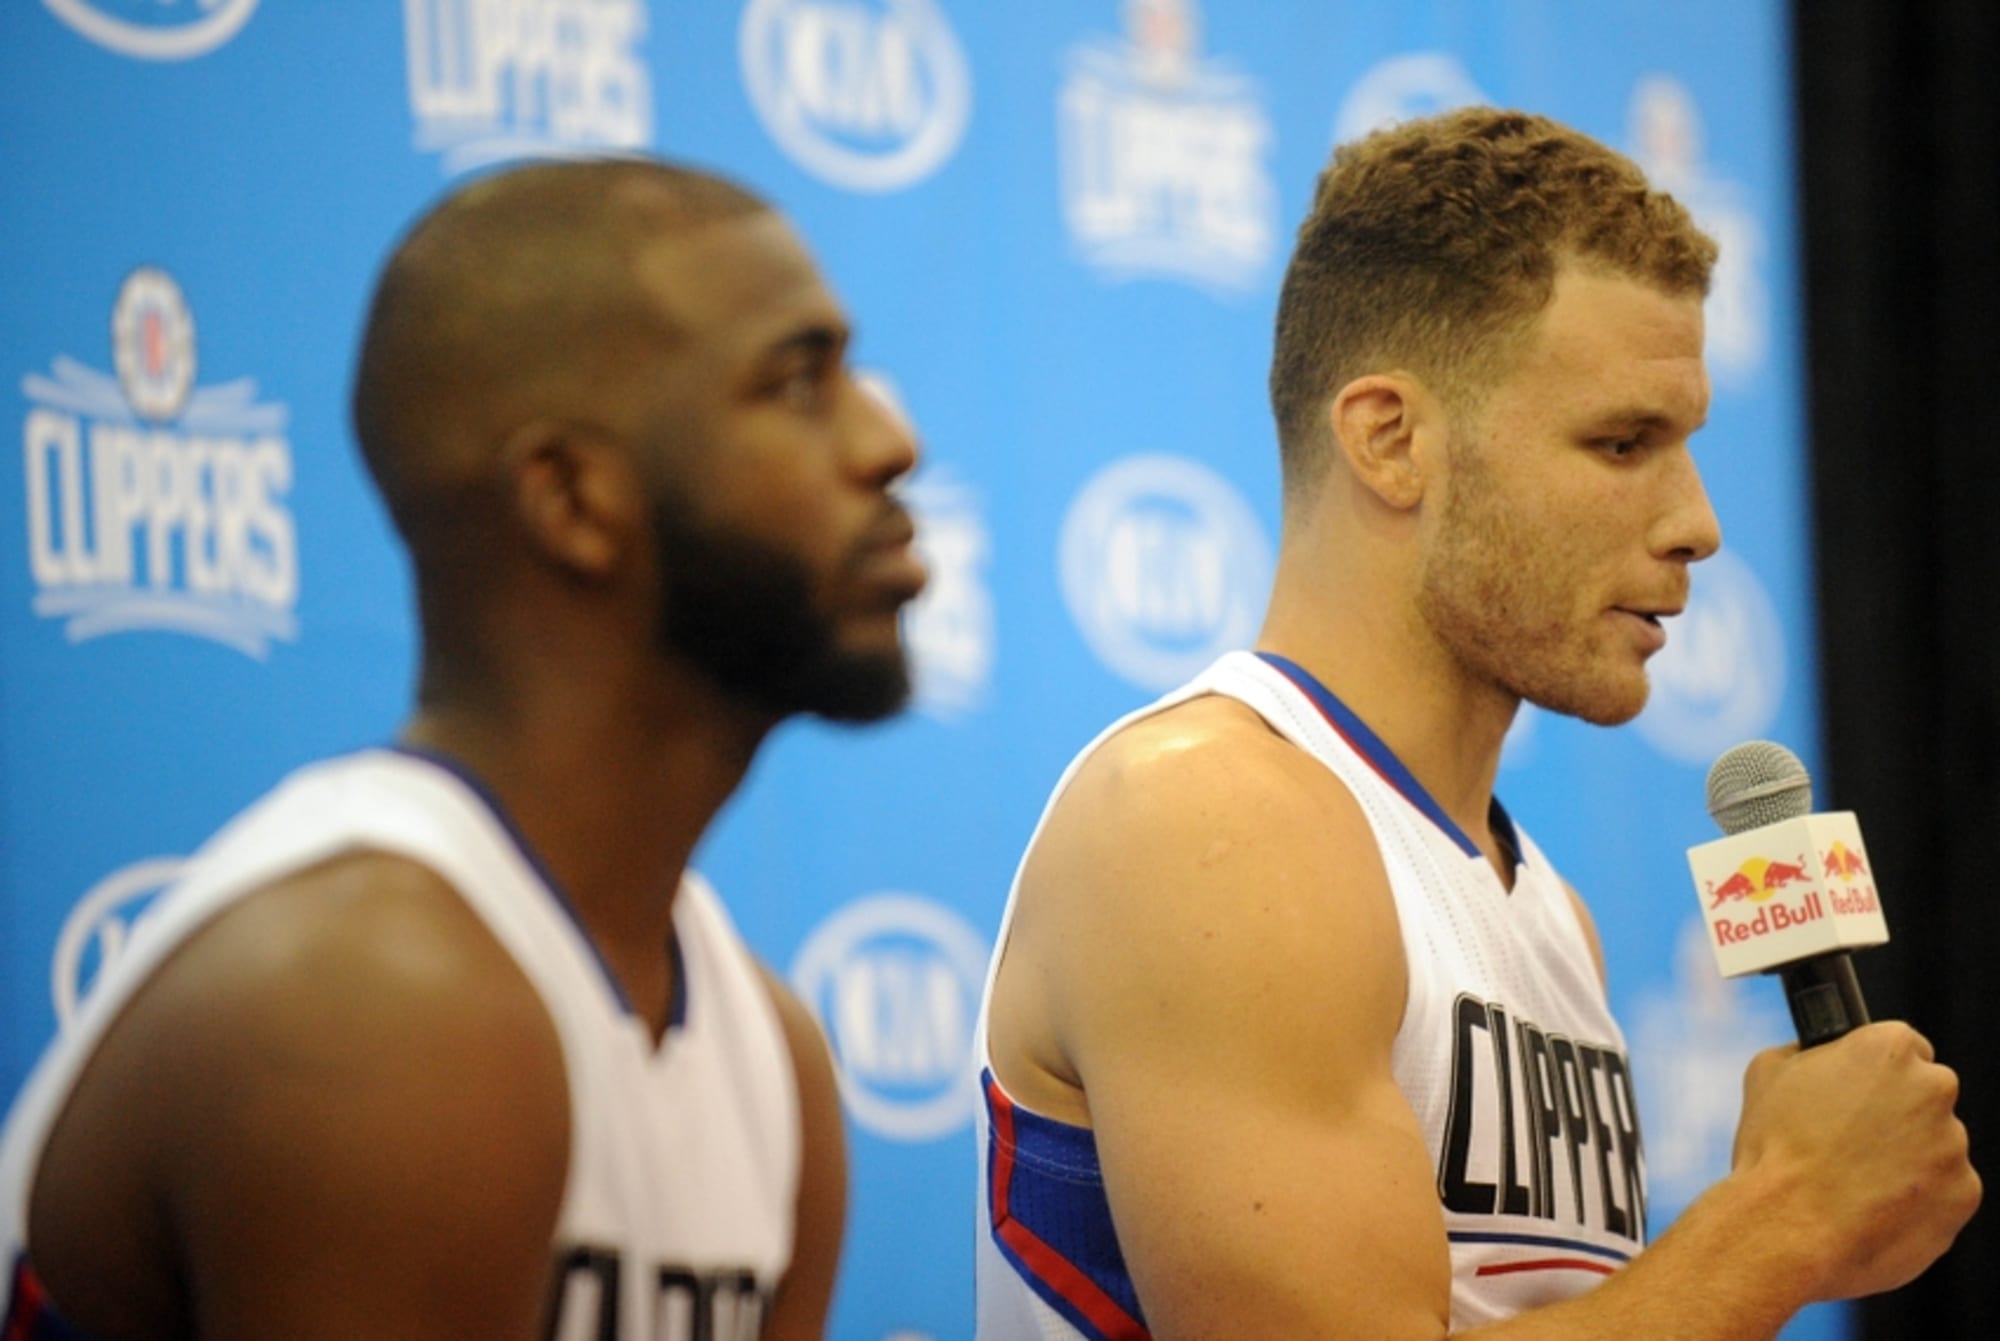 LA Clippers committed to keep Chris Paul, Blake Griffin long term